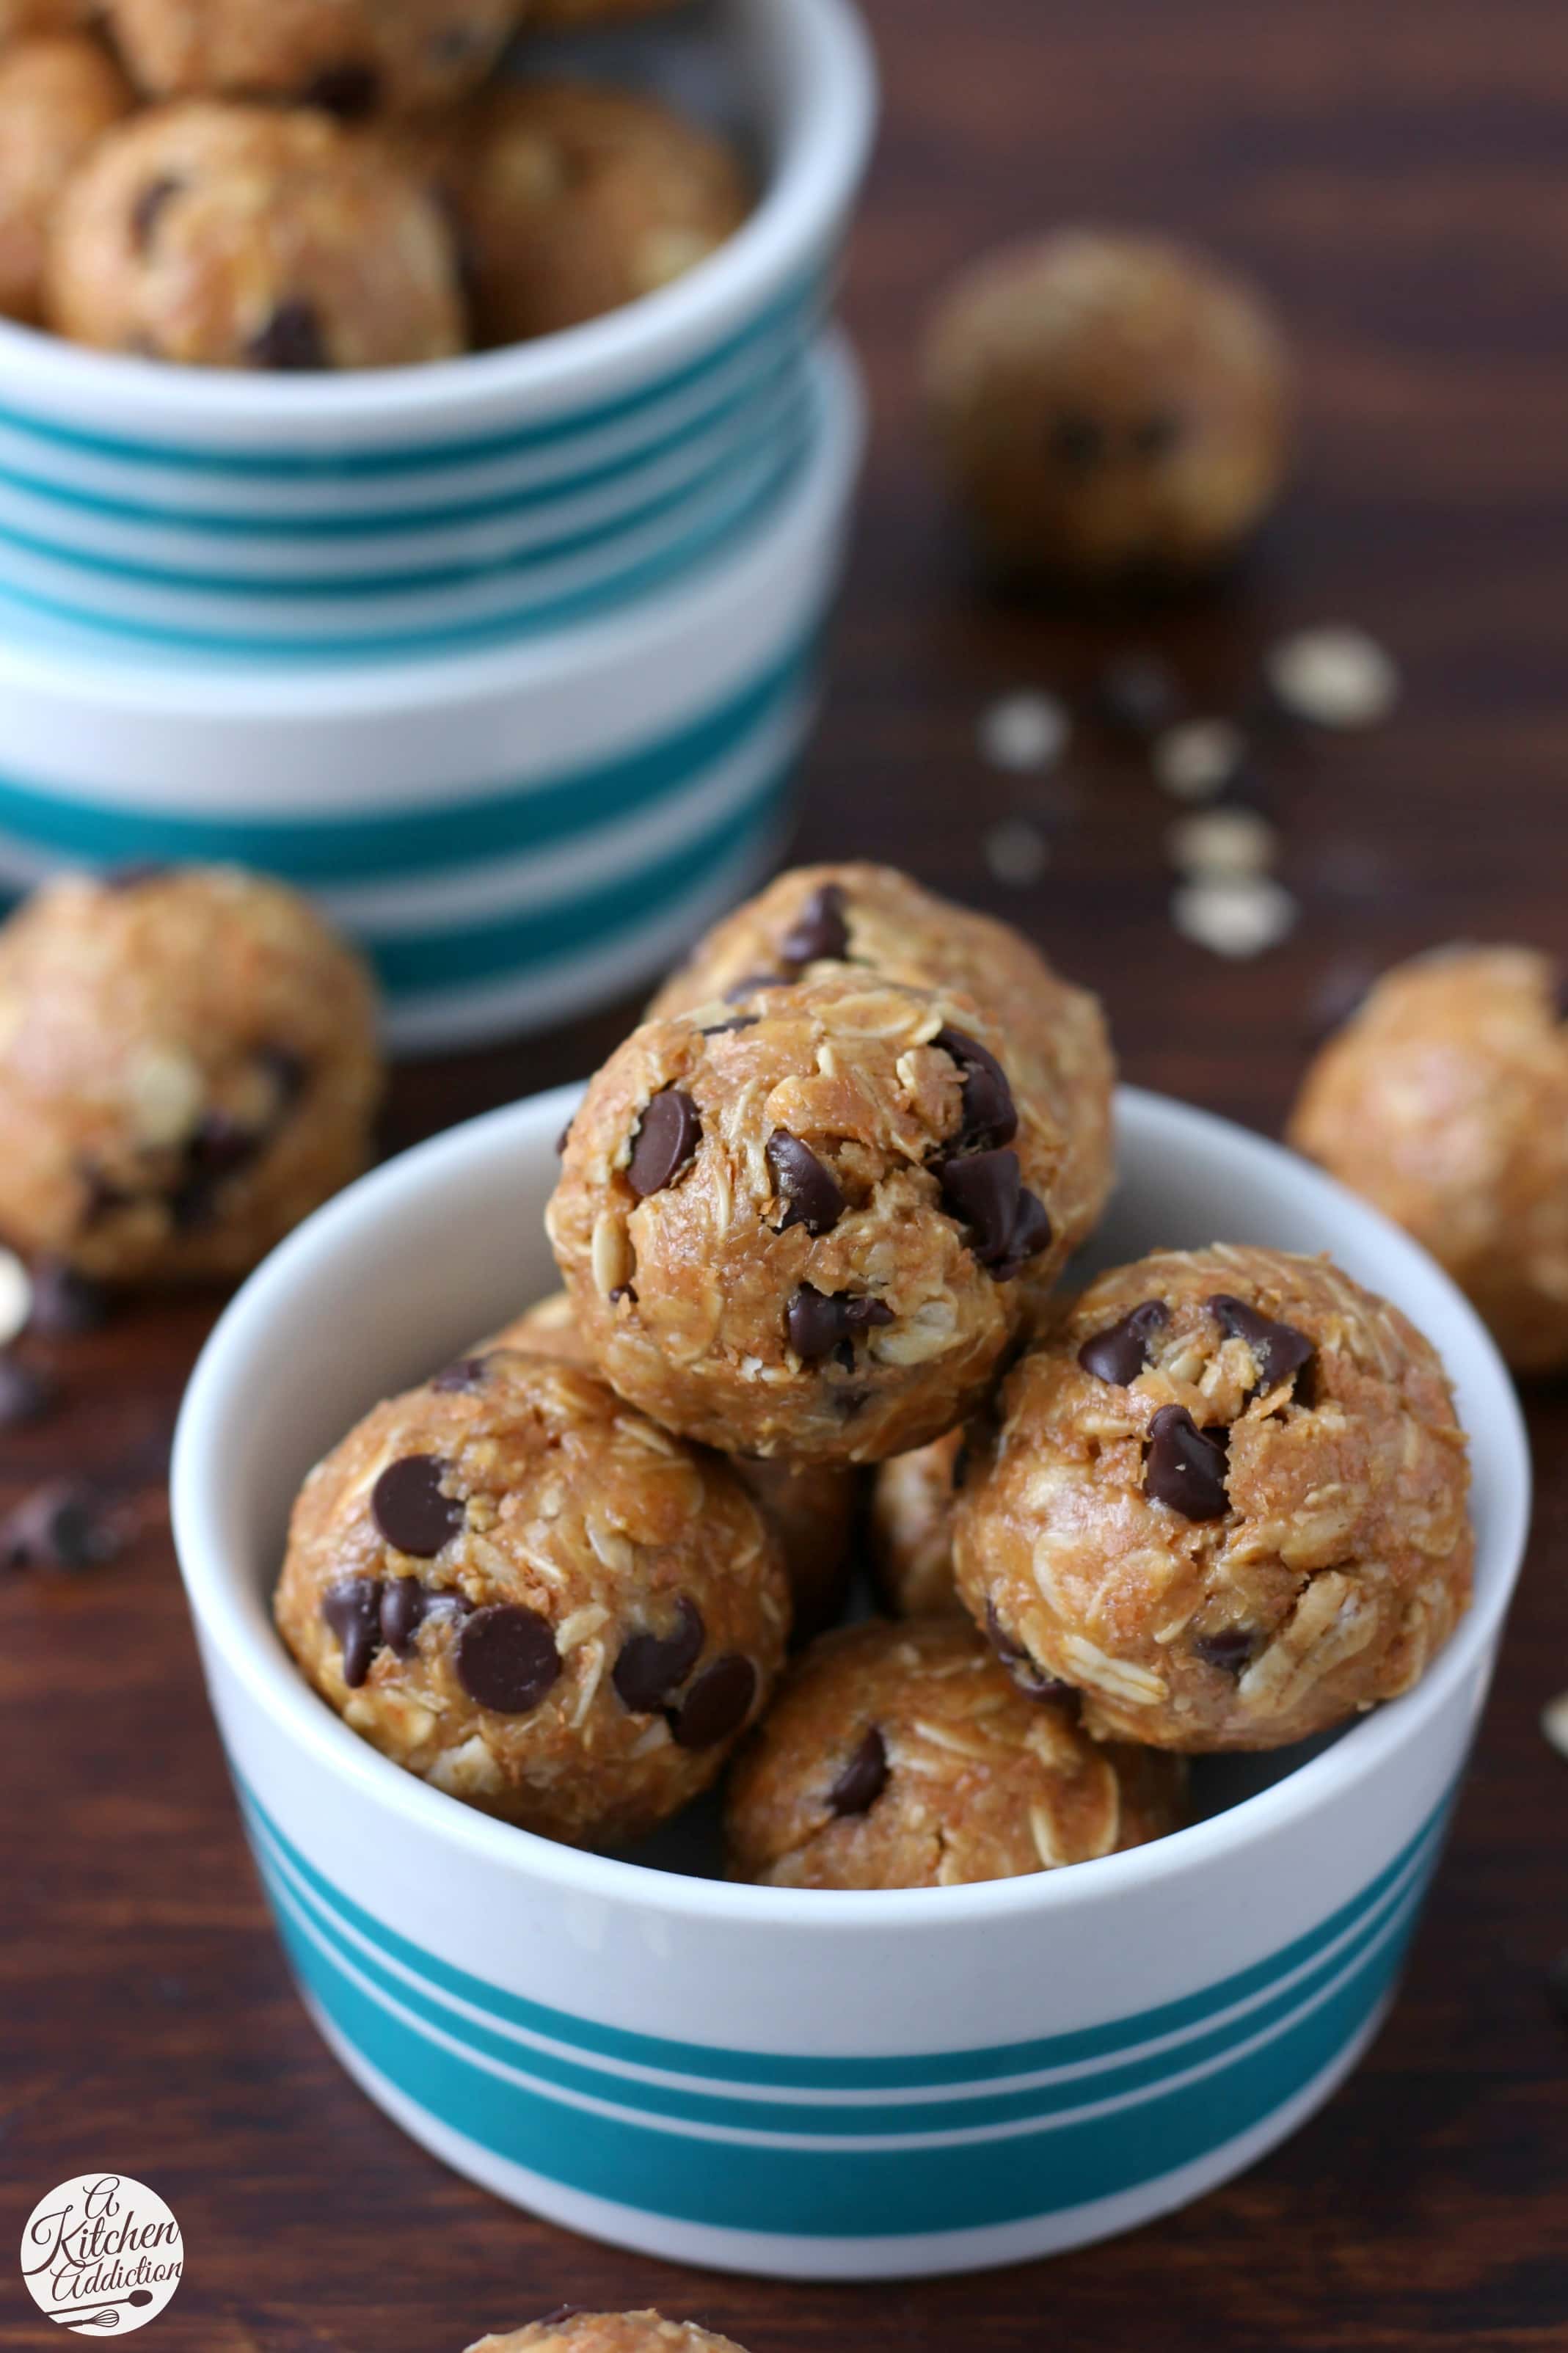 Easy No Bake Peanut Butter Oatmeal Cookie Granola Bites Recipe from A Kitchen Addiction